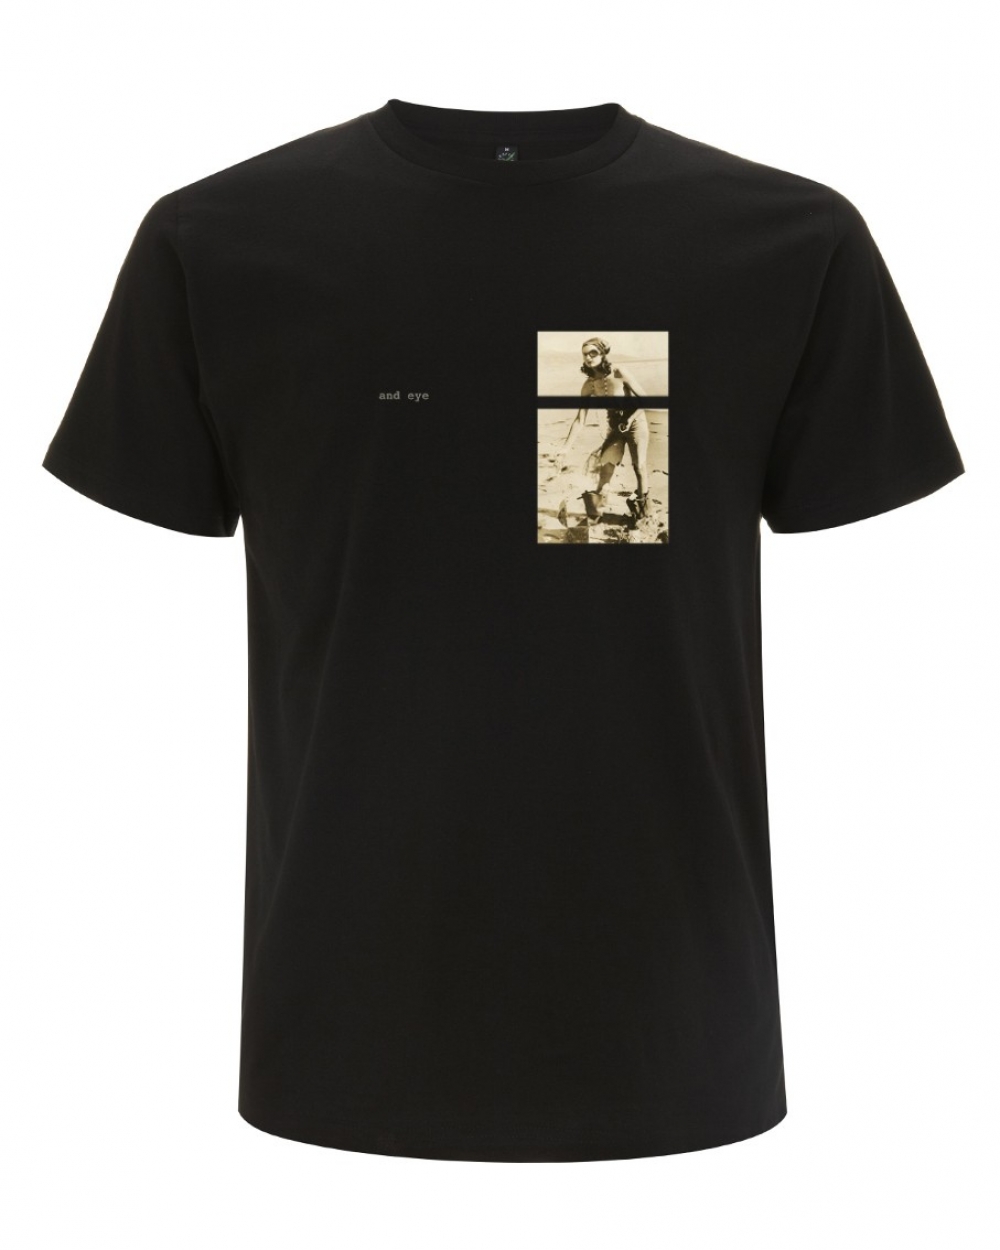 Organic classic t-shirt with a vintage image of a pirate woman